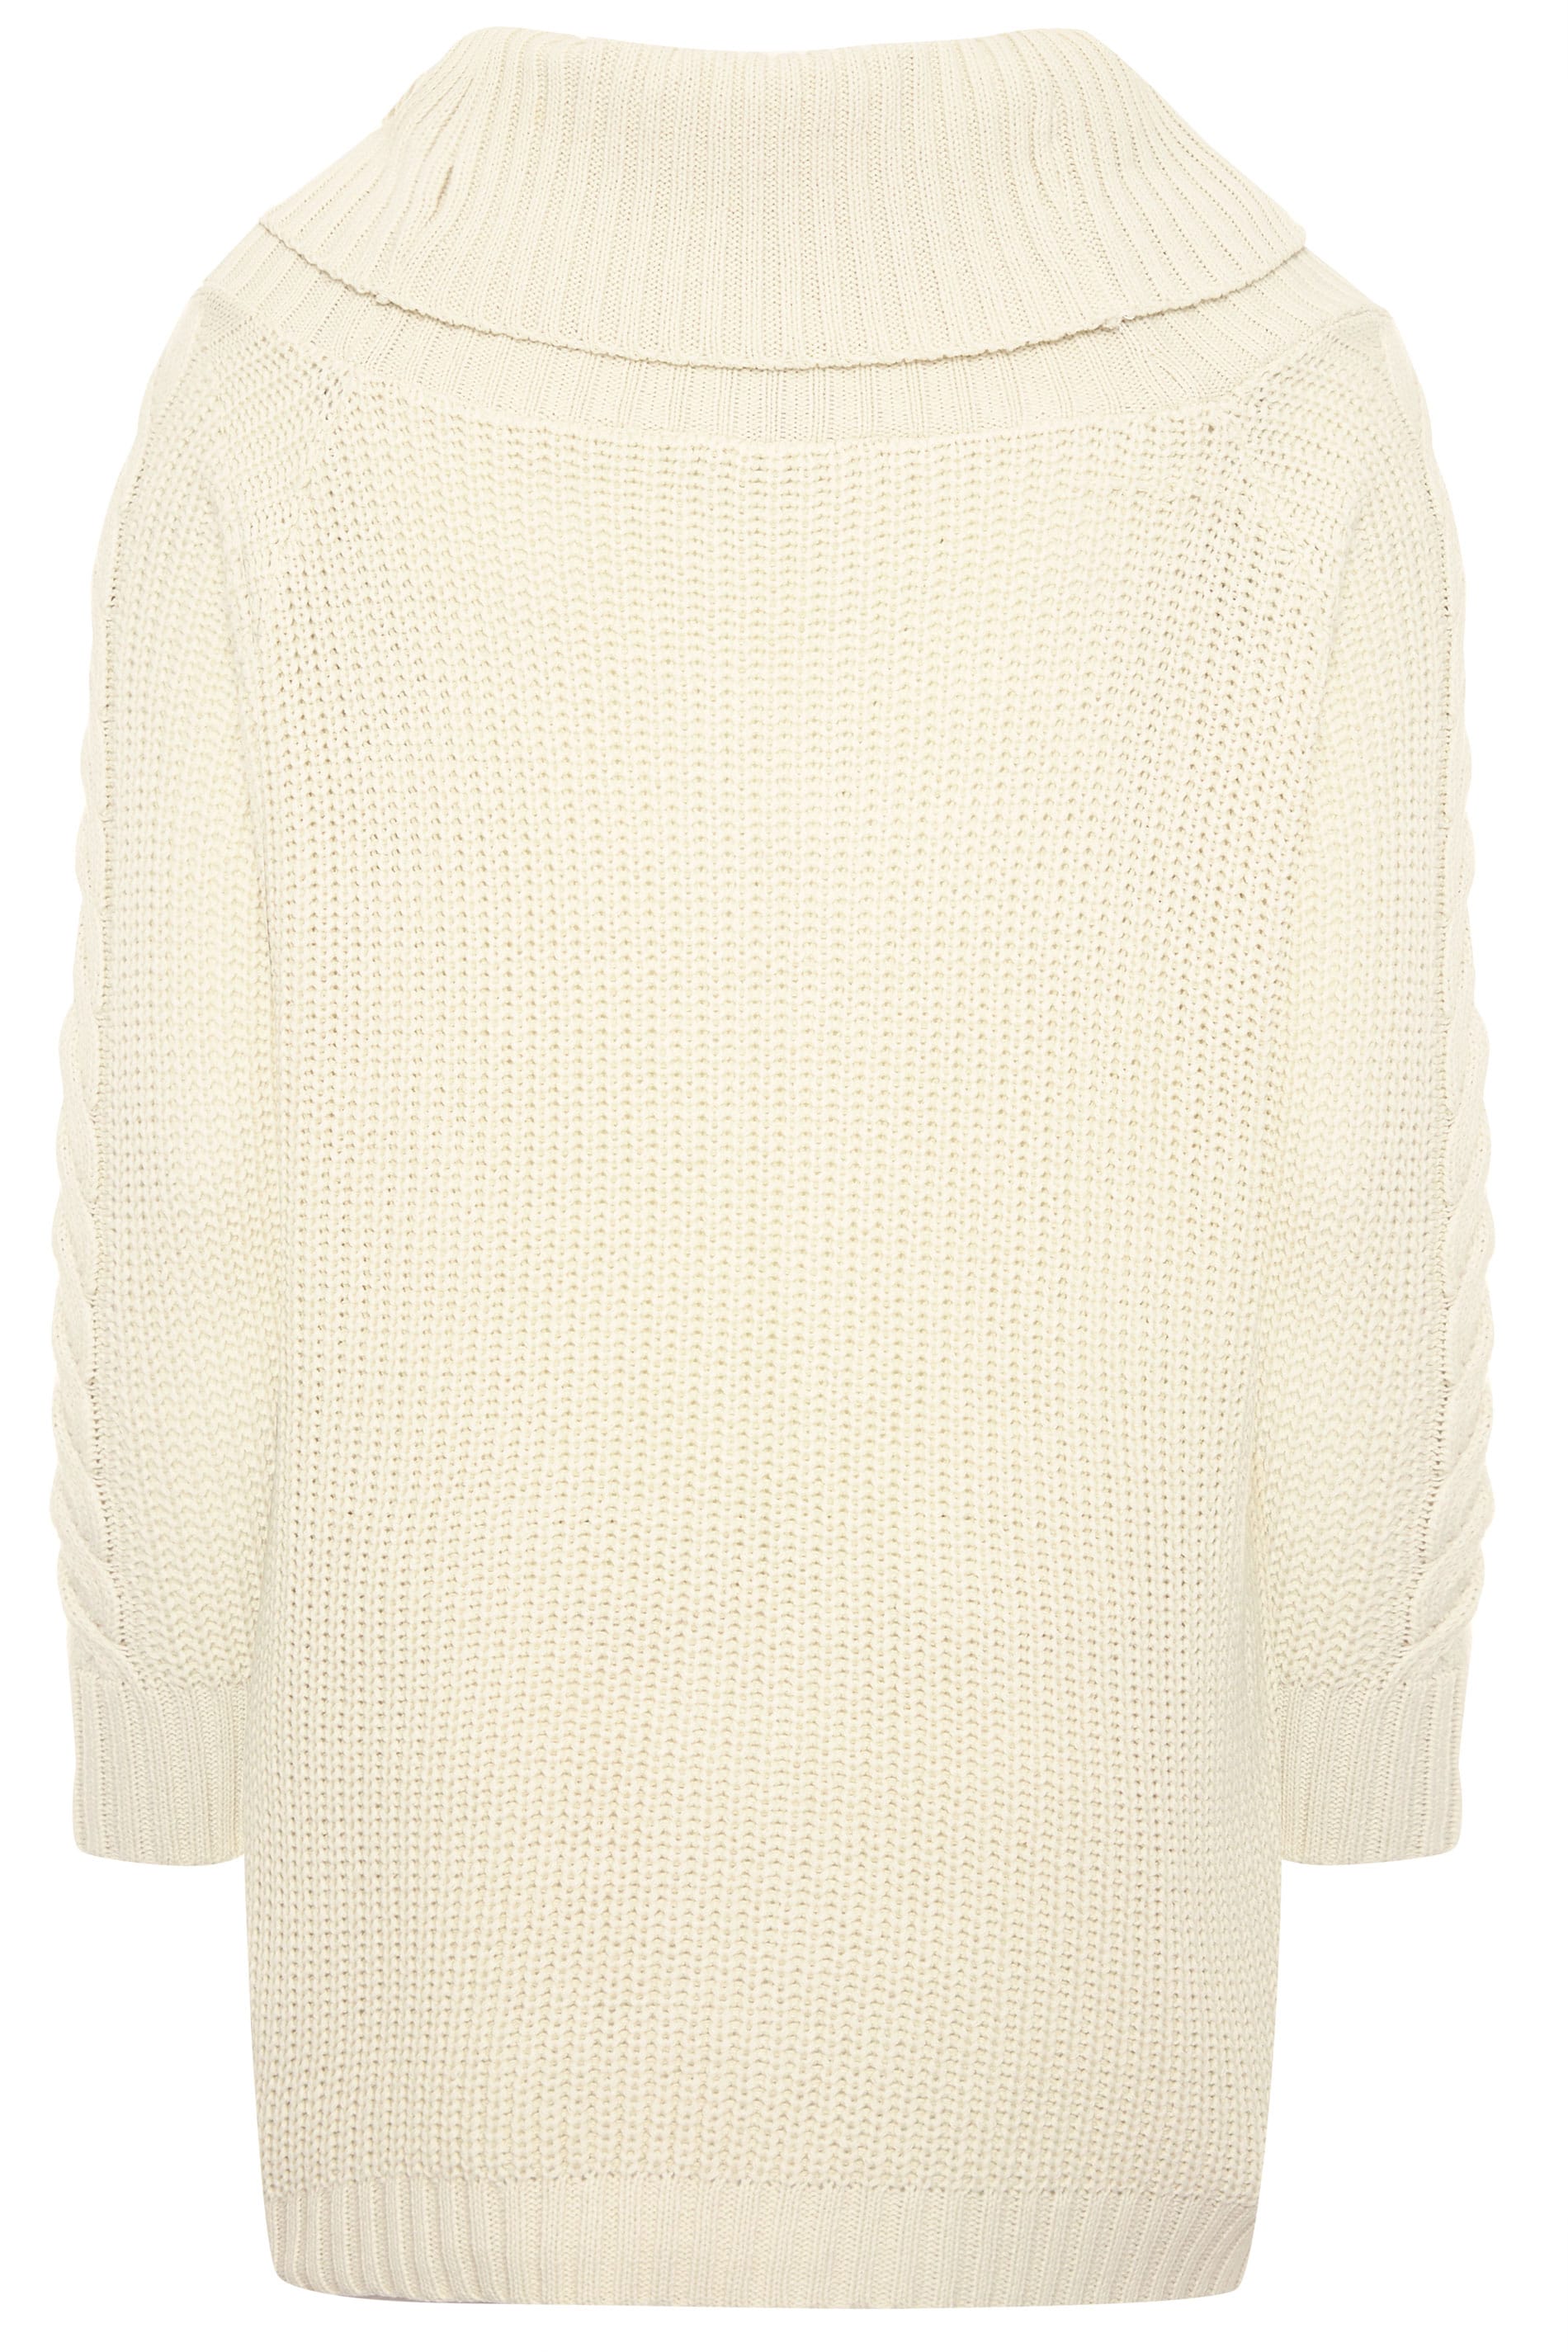 Cream Cable Knit Longline Jumper | Yours Clothing